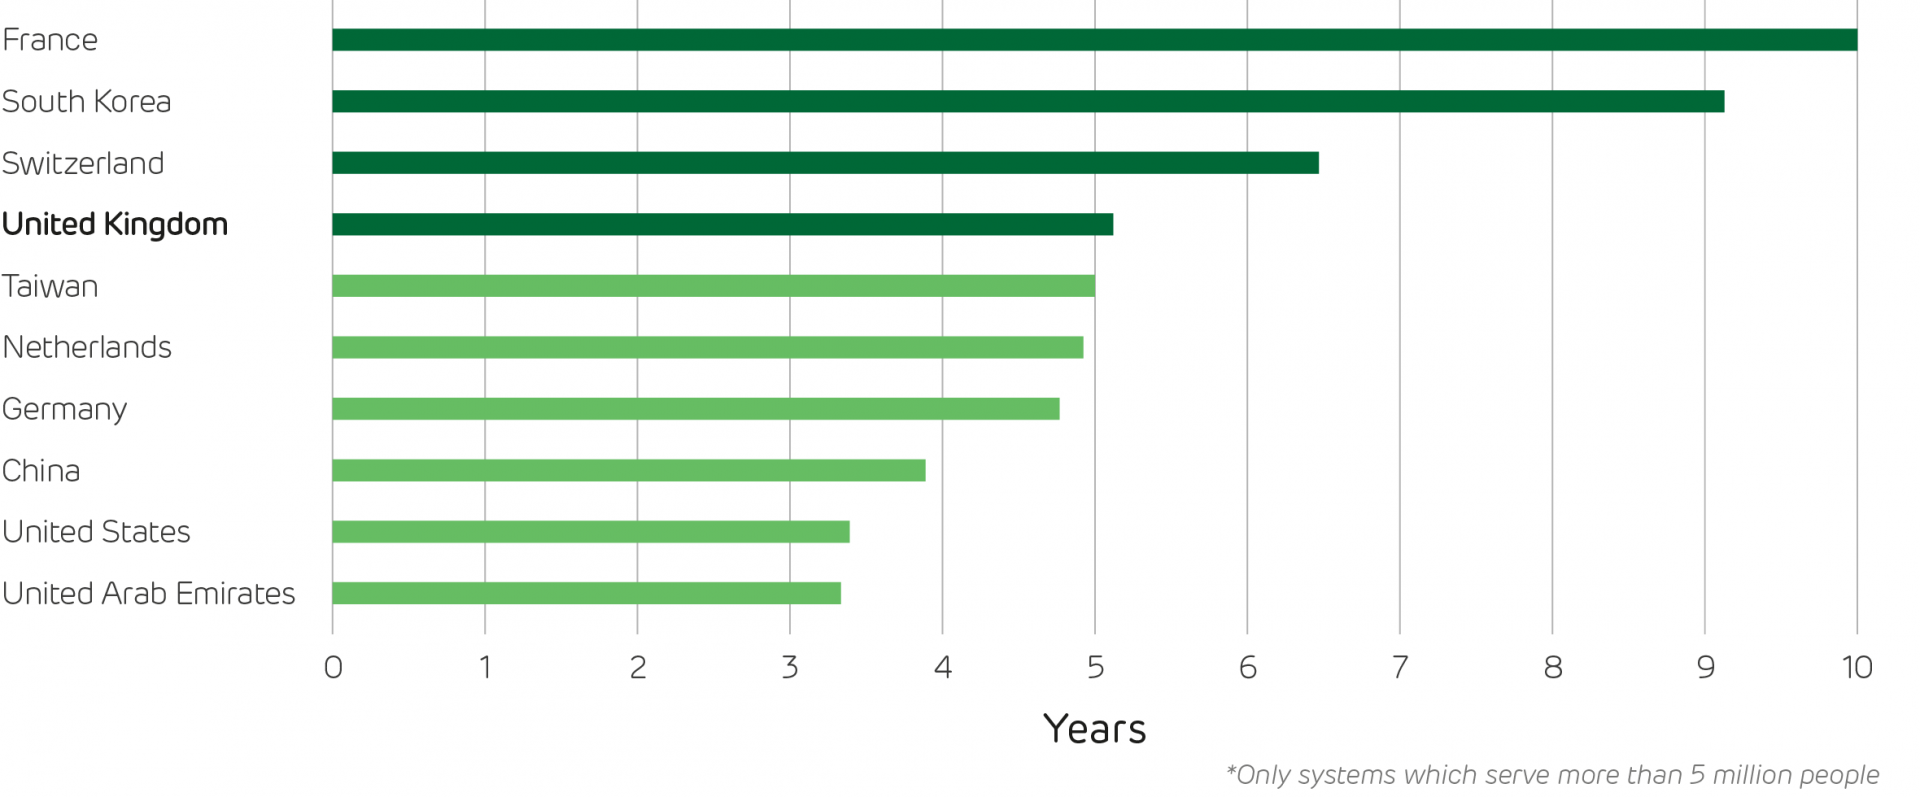 chart: The ten most reliable power systems in the world, measured by the time between blackouts.